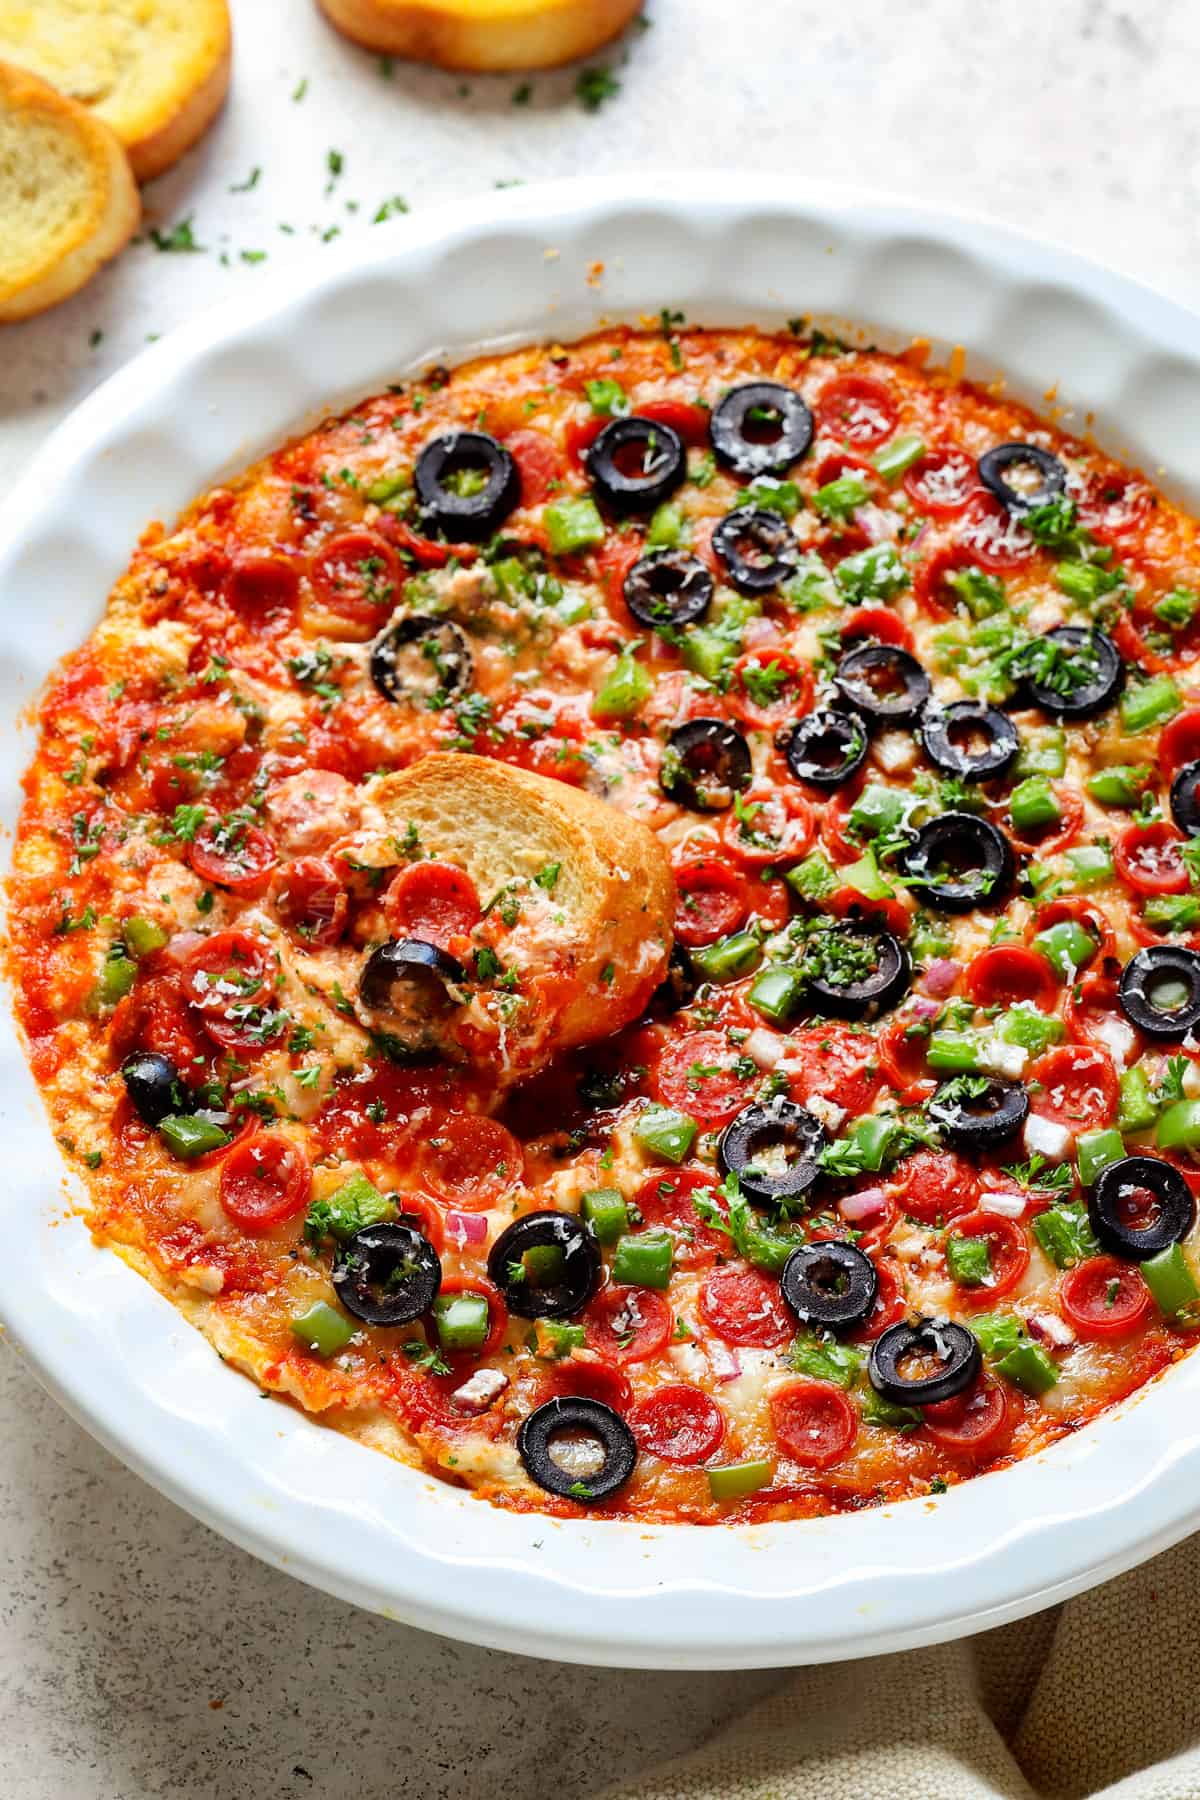 show how to make pizza dip by adding pepperoni, bell peppers, olives and red onions 